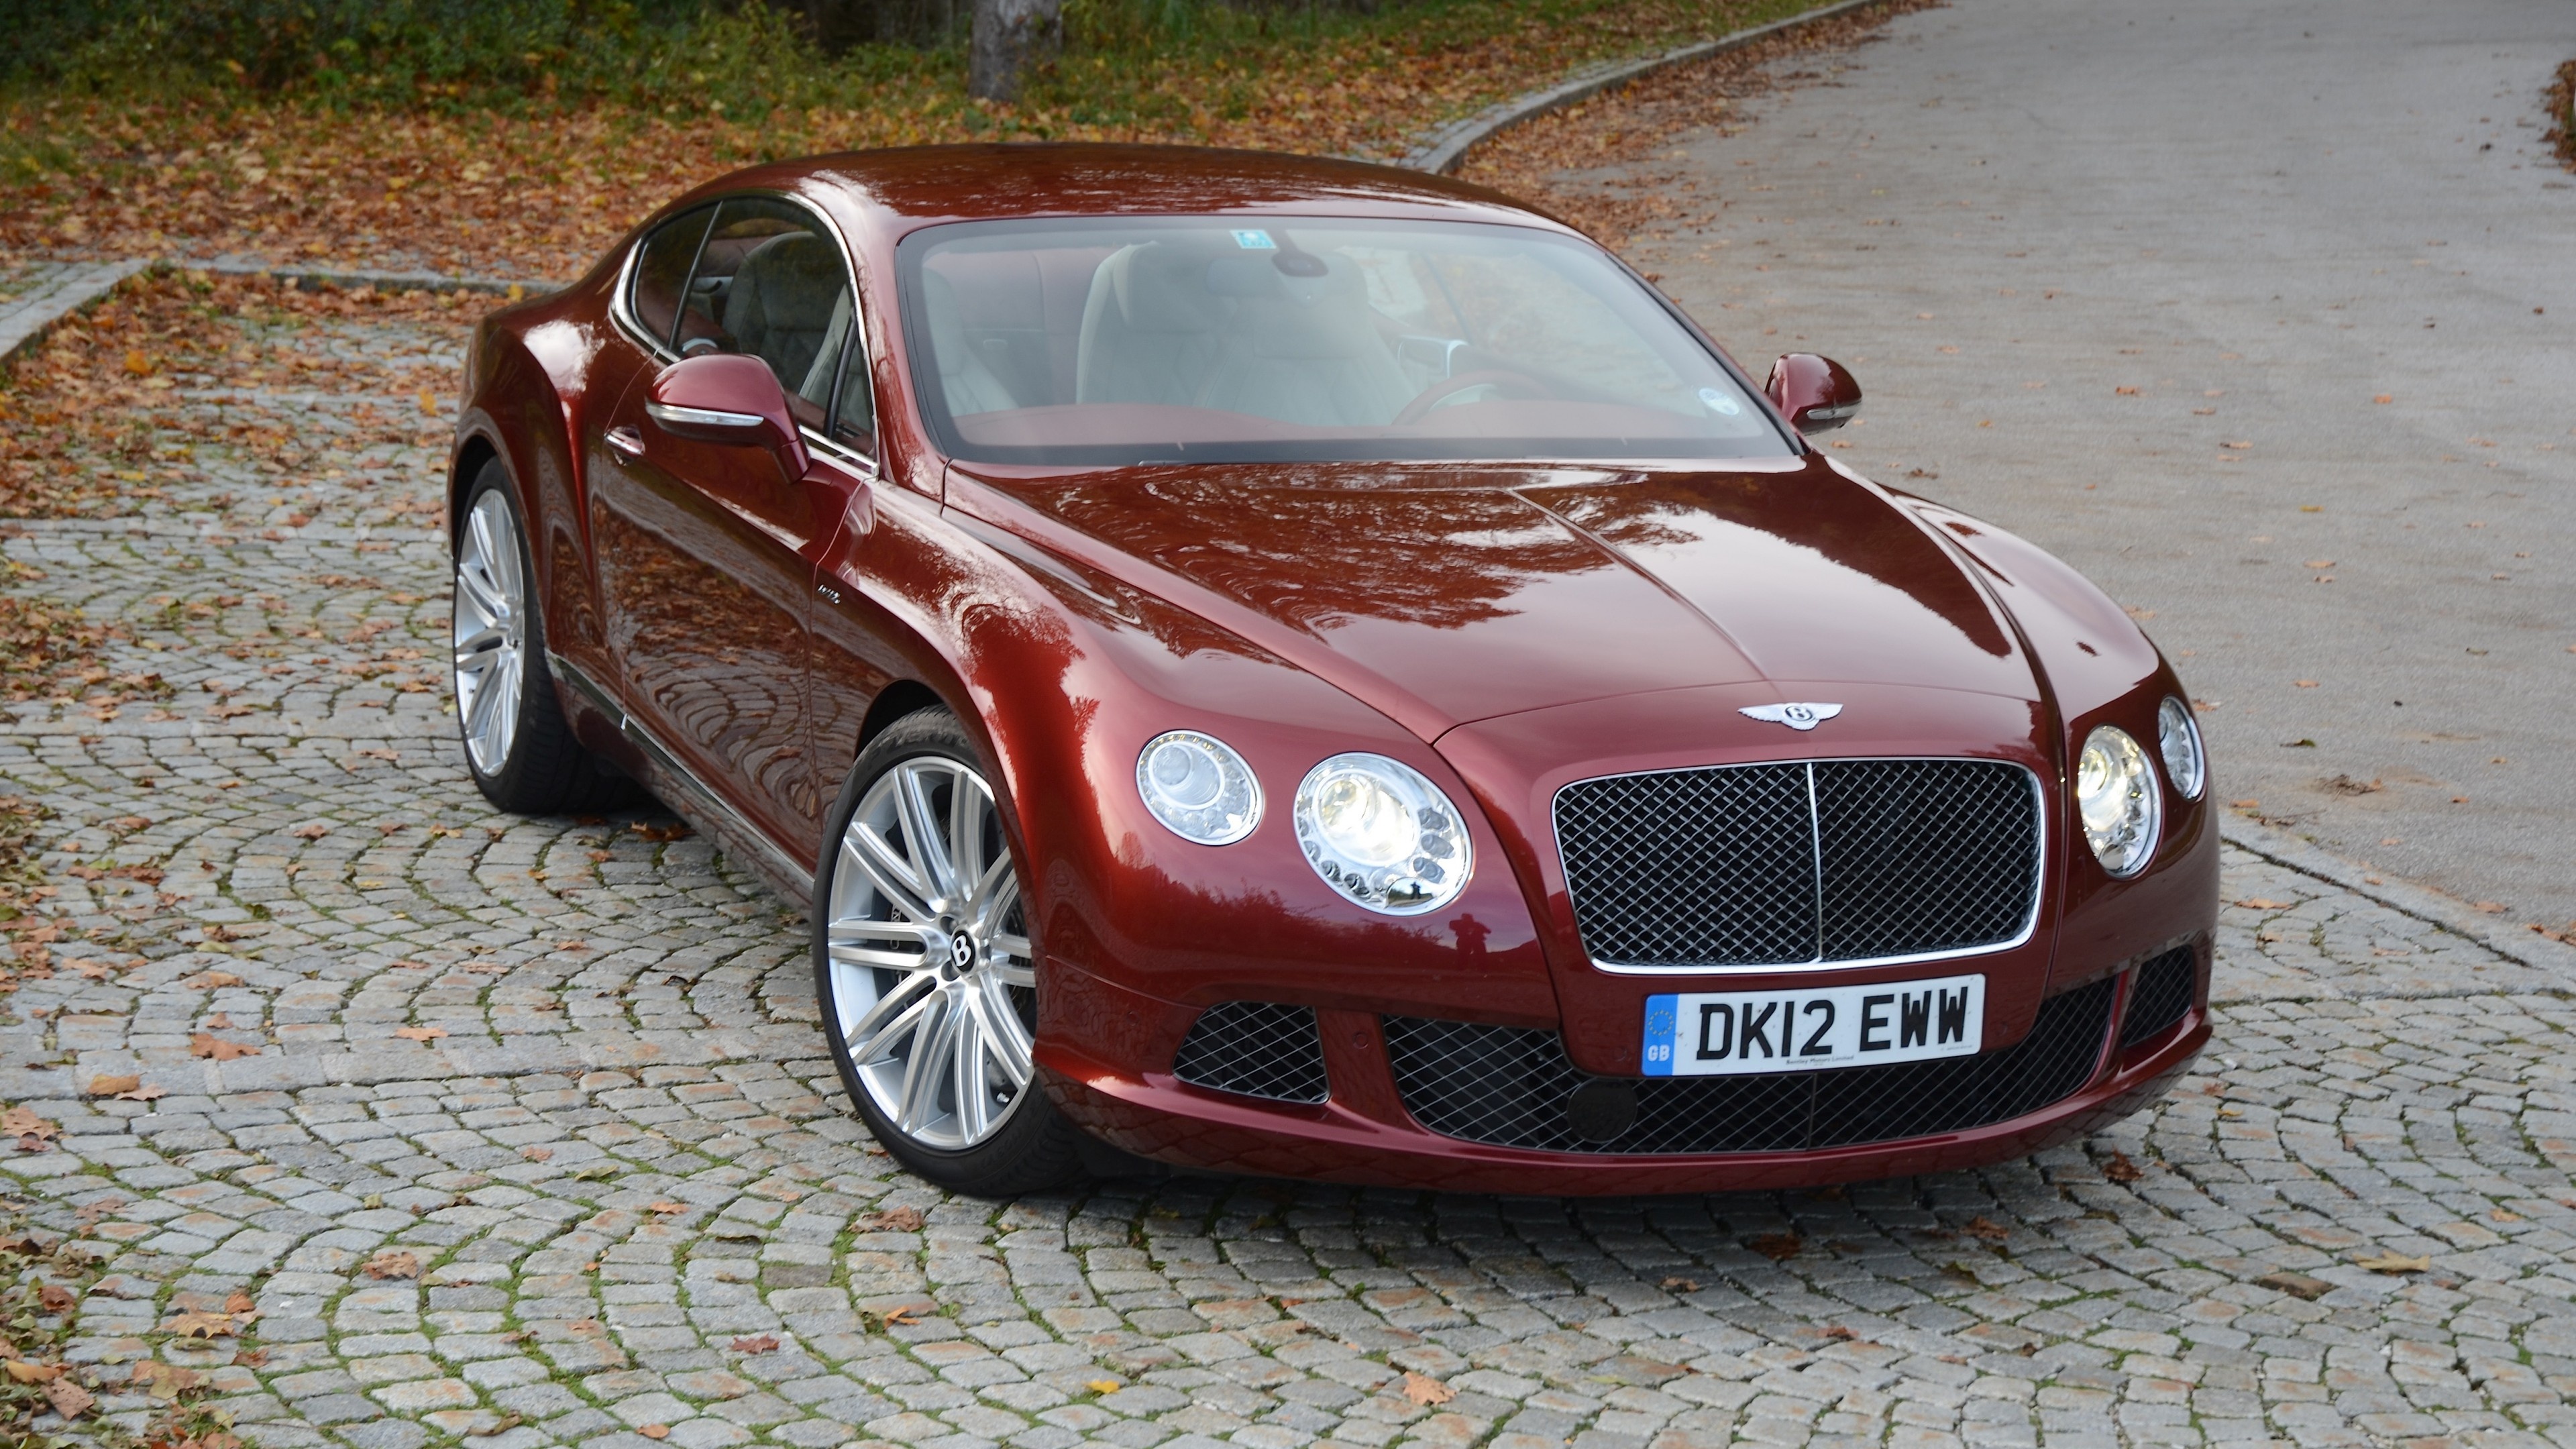 Bentley Continental GT (Auto), Luxury cars and bikes, Supersports edition, Striking red front, 3840x2160 4K Desktop